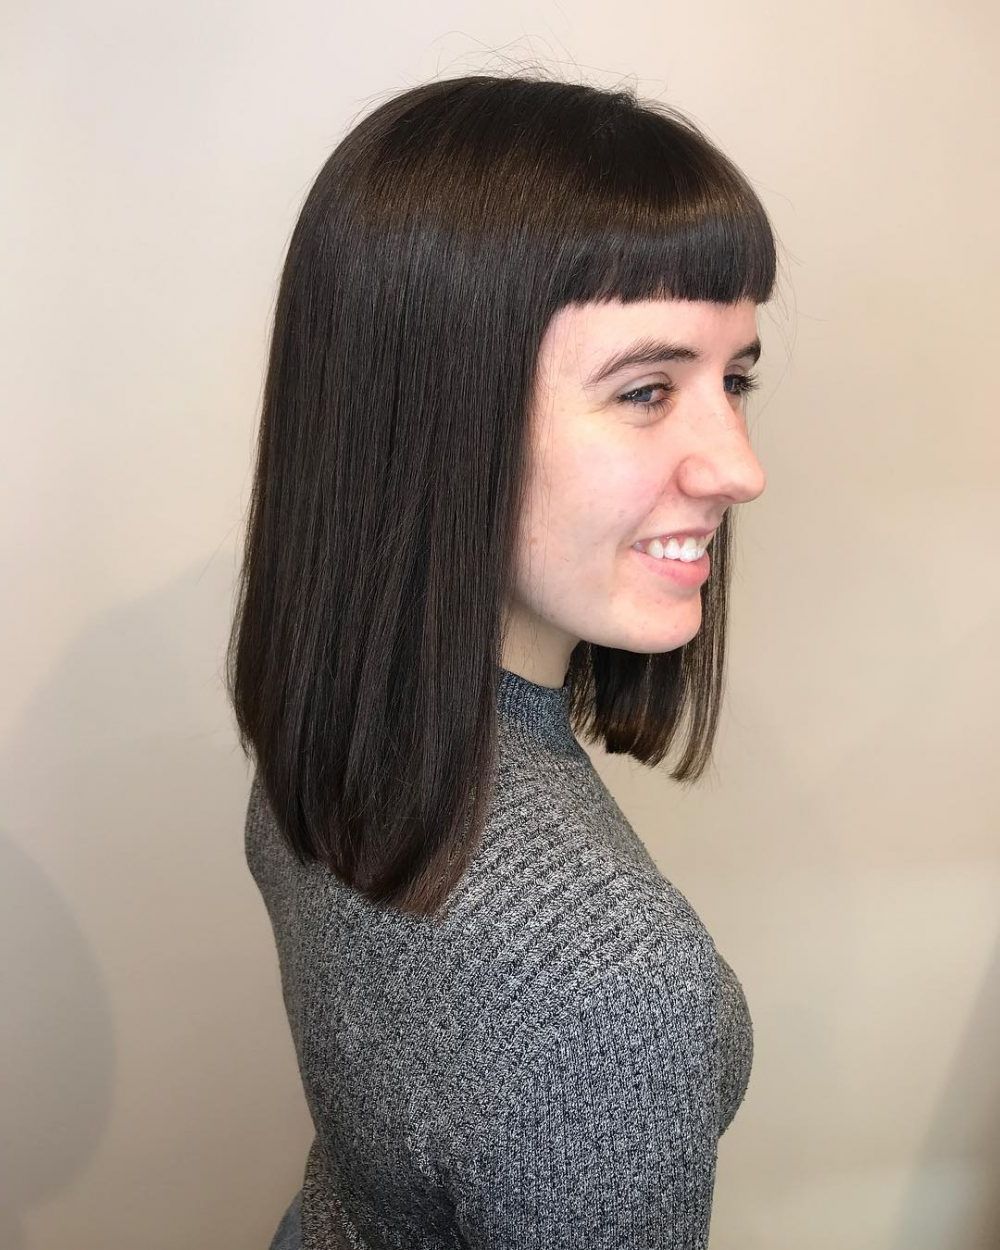 53 Popular Medium Length Hairstyles With Bangs In 2019 Regarding Current Medium Haircuts With Full Bangs (View 6 of 20)